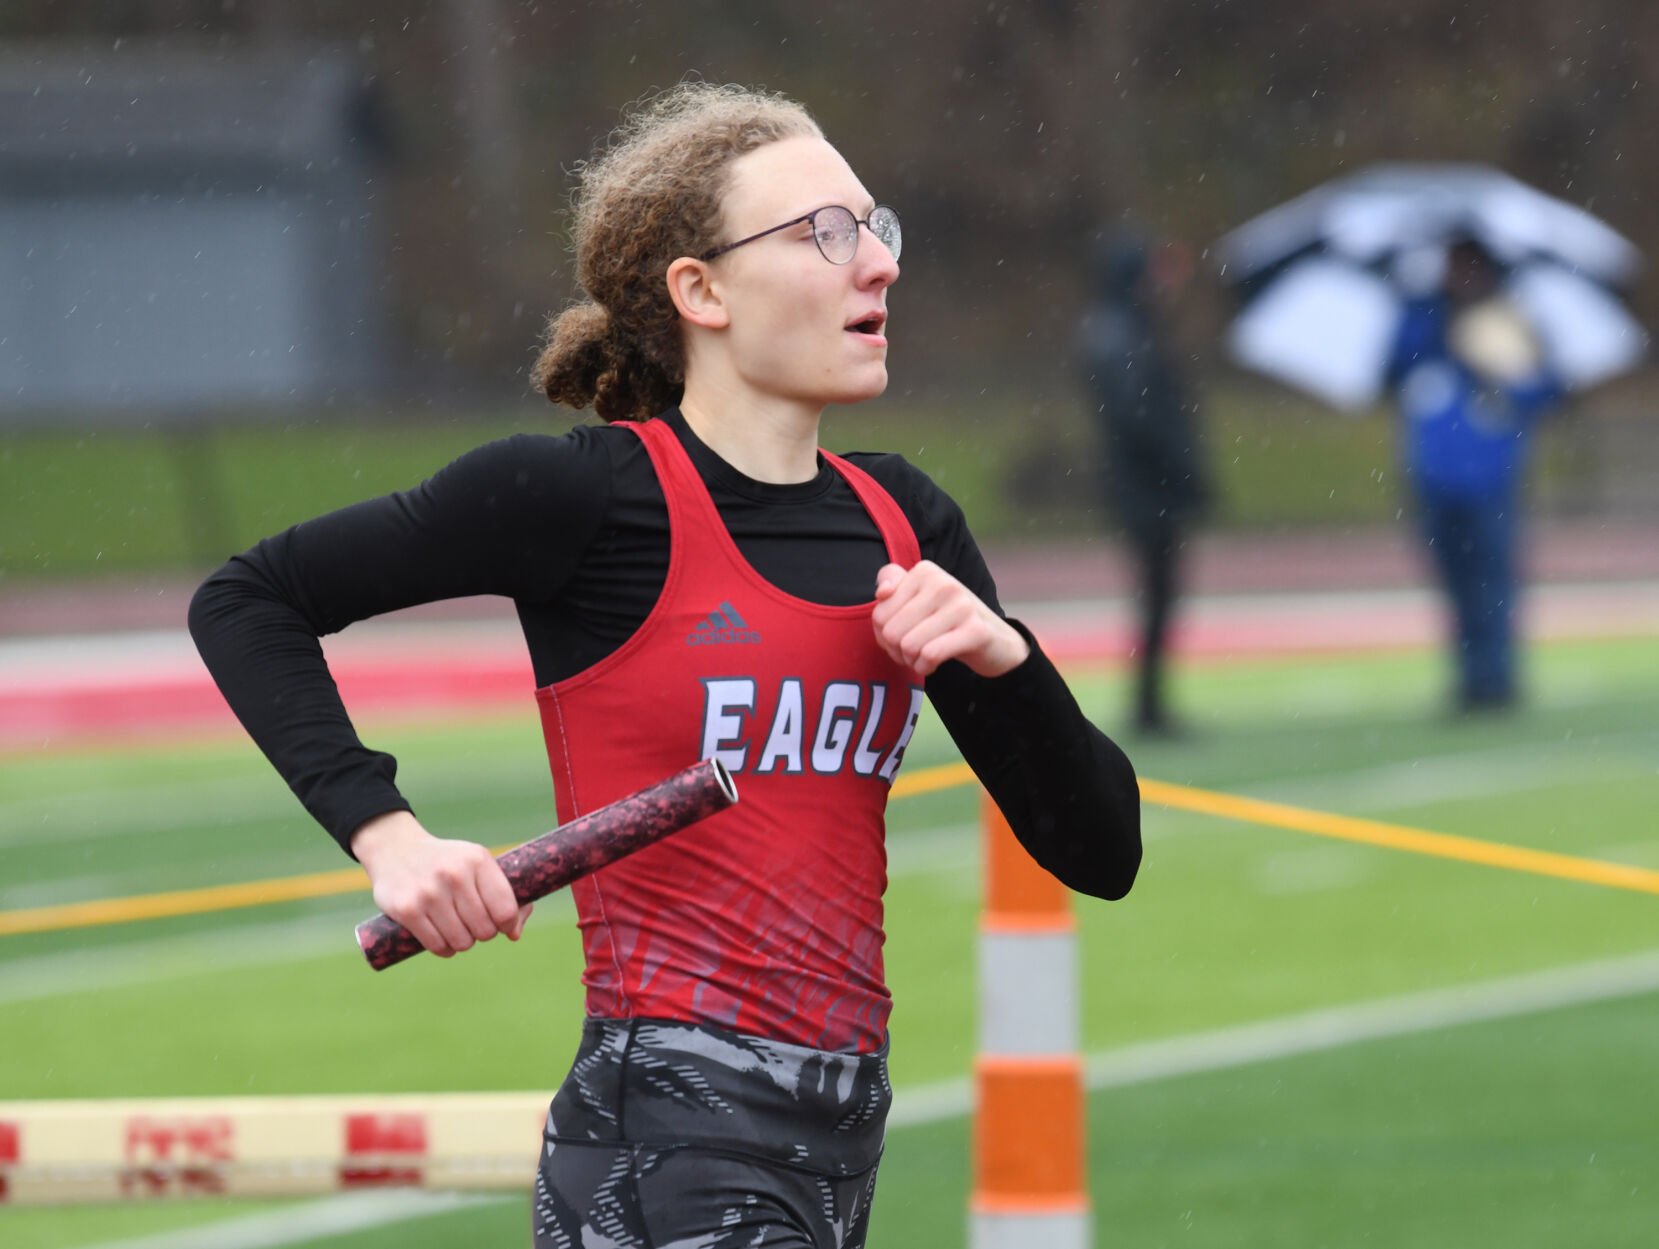 Ashtabula County Track Teams Shine at Red Raider Relays with Strong Performances